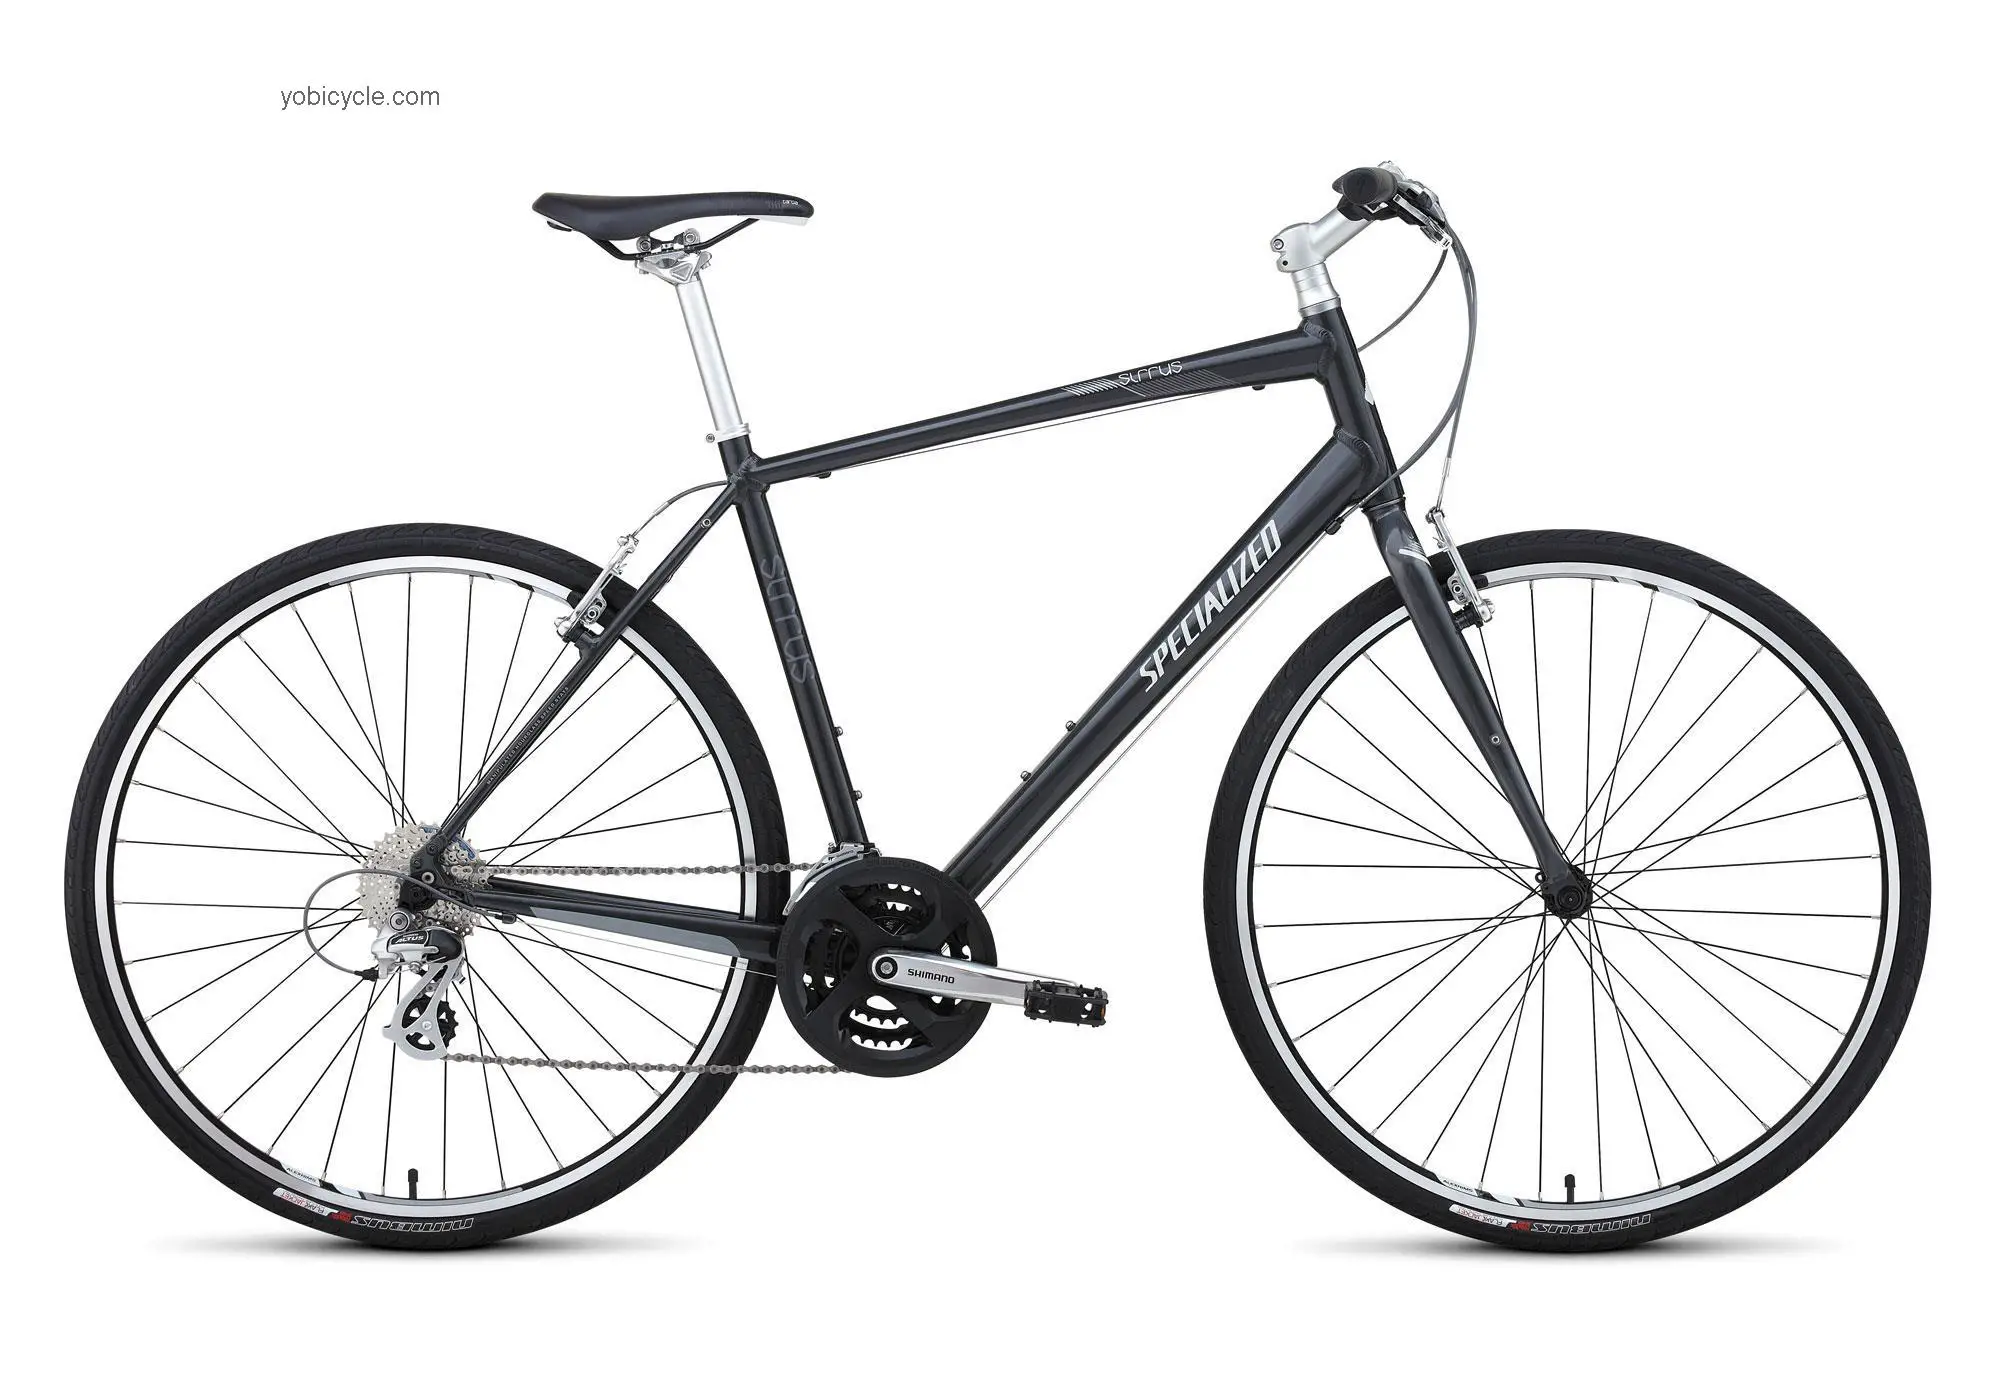 Specialized Sirrus 2012 comparison online with competitors